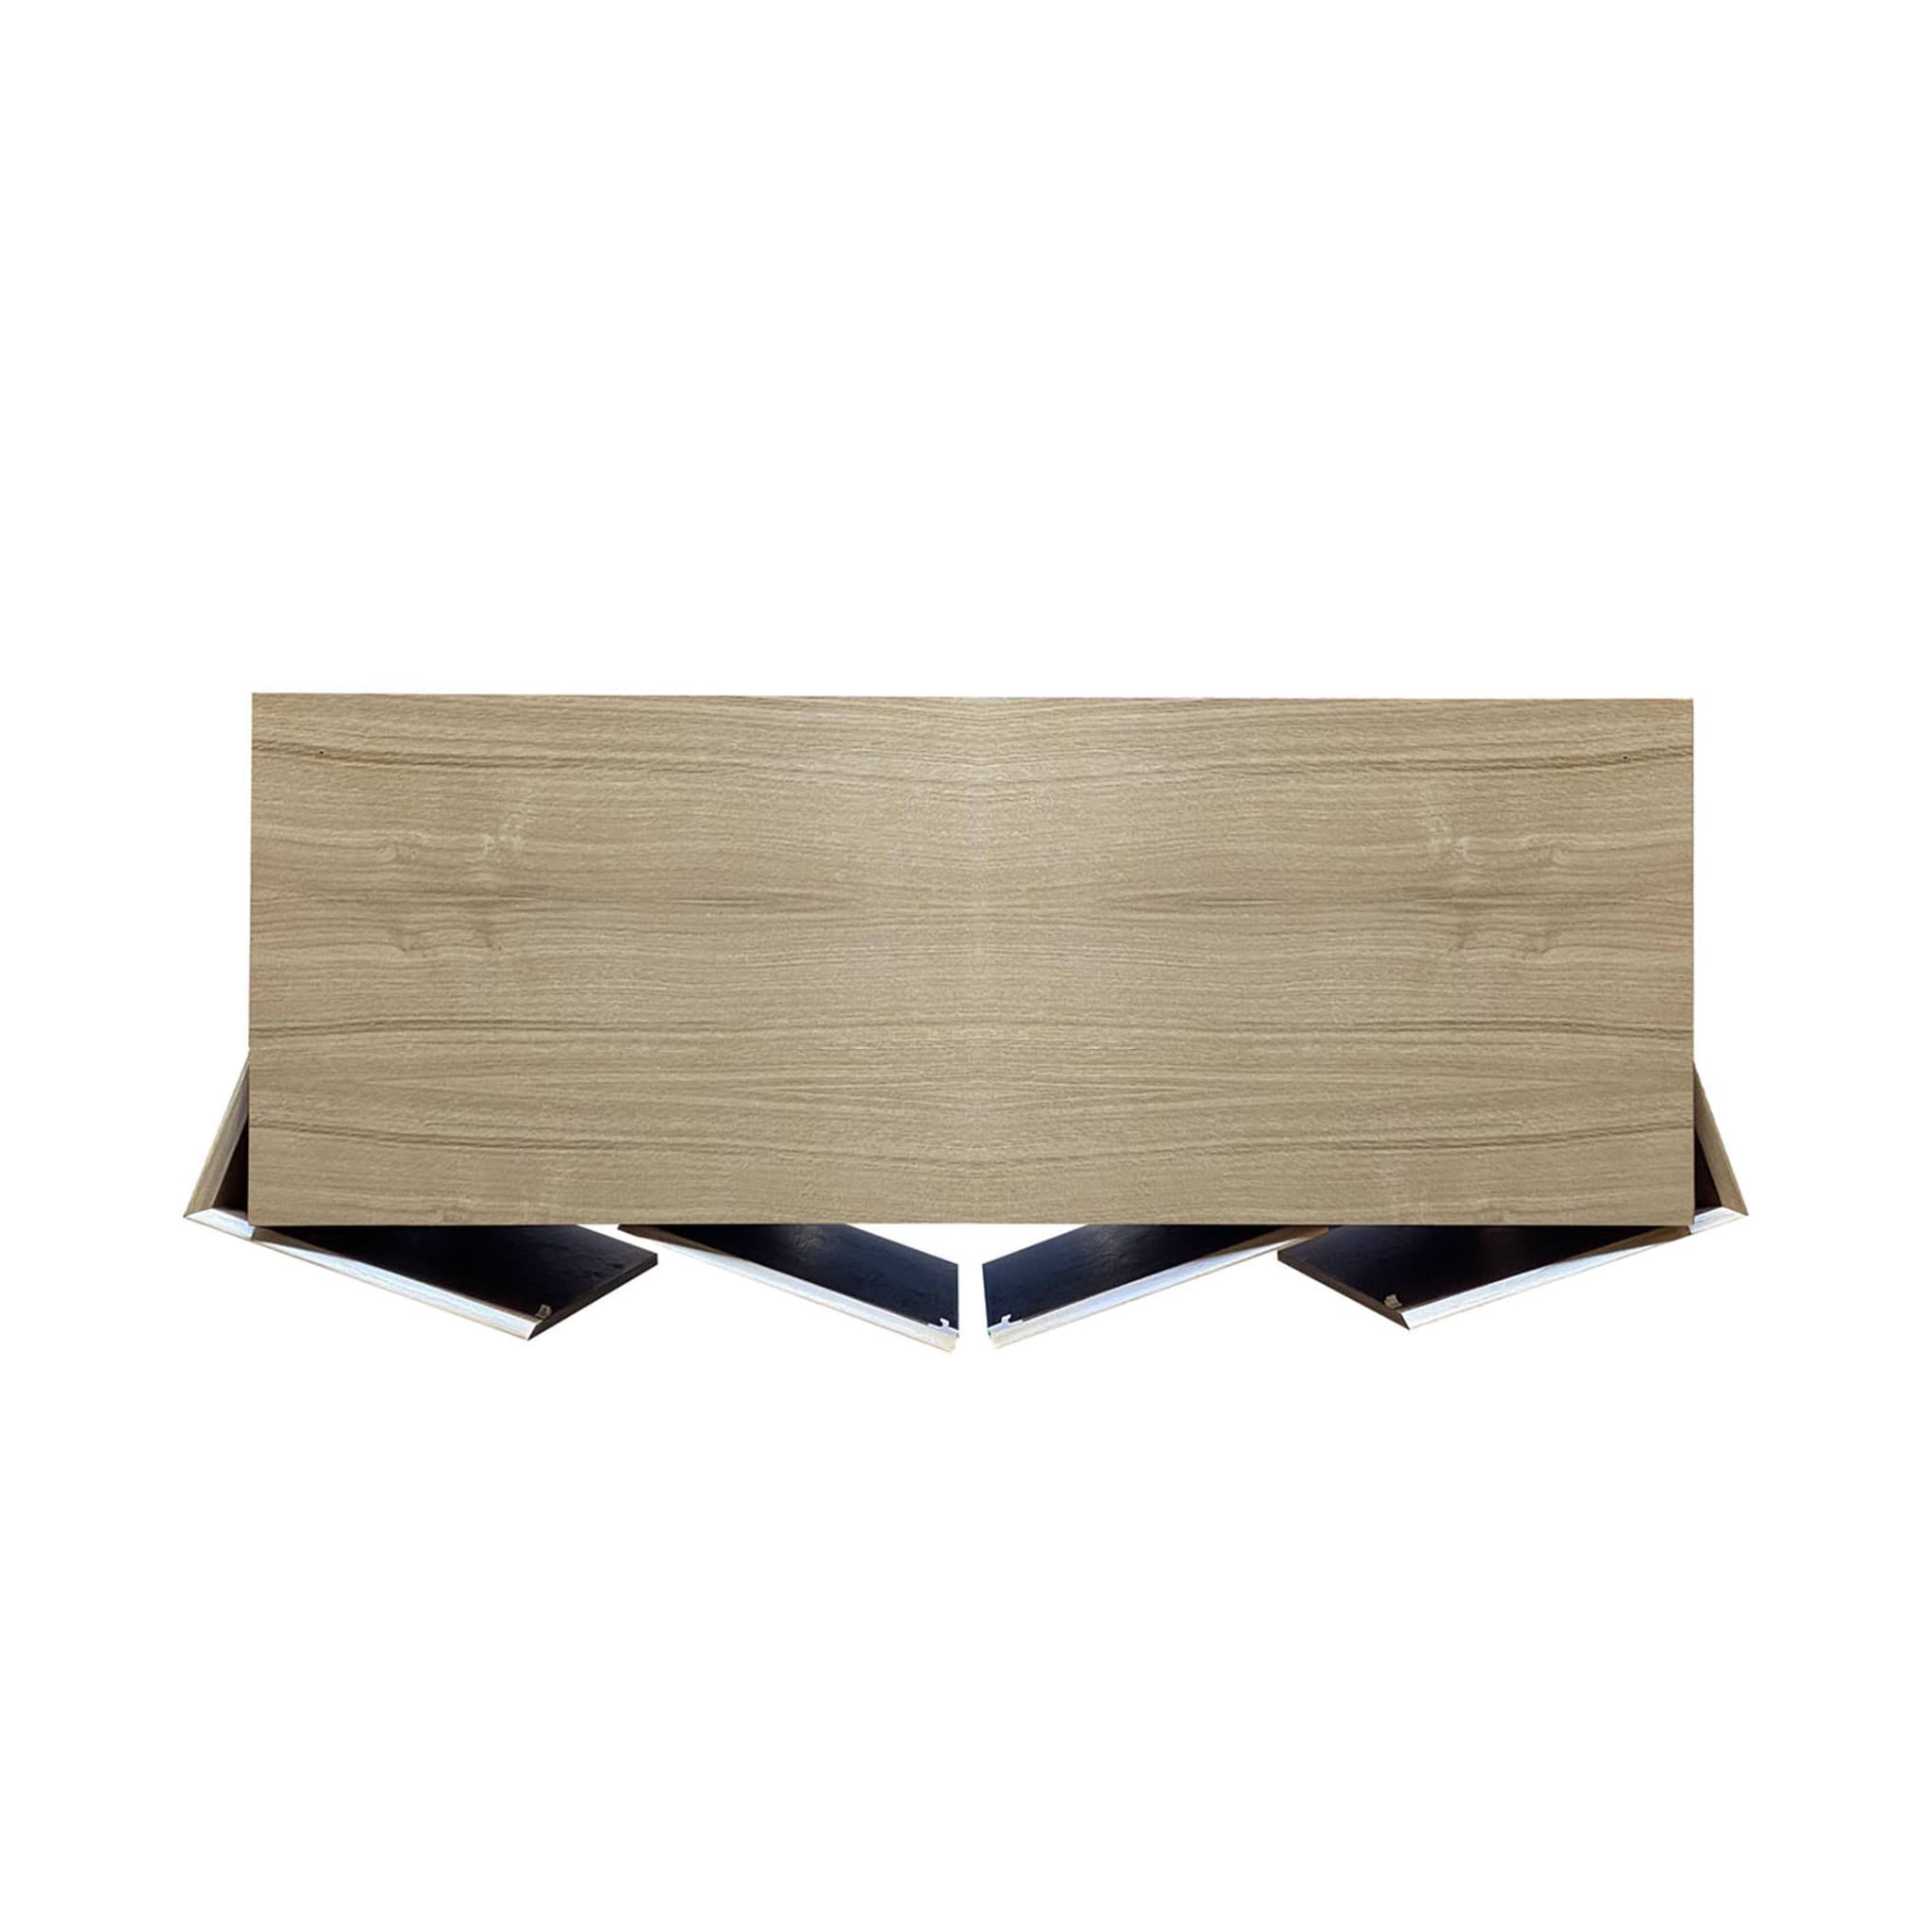 Md4 4-Door Striped Sideboard by Meccani Studio - Alternative view 3